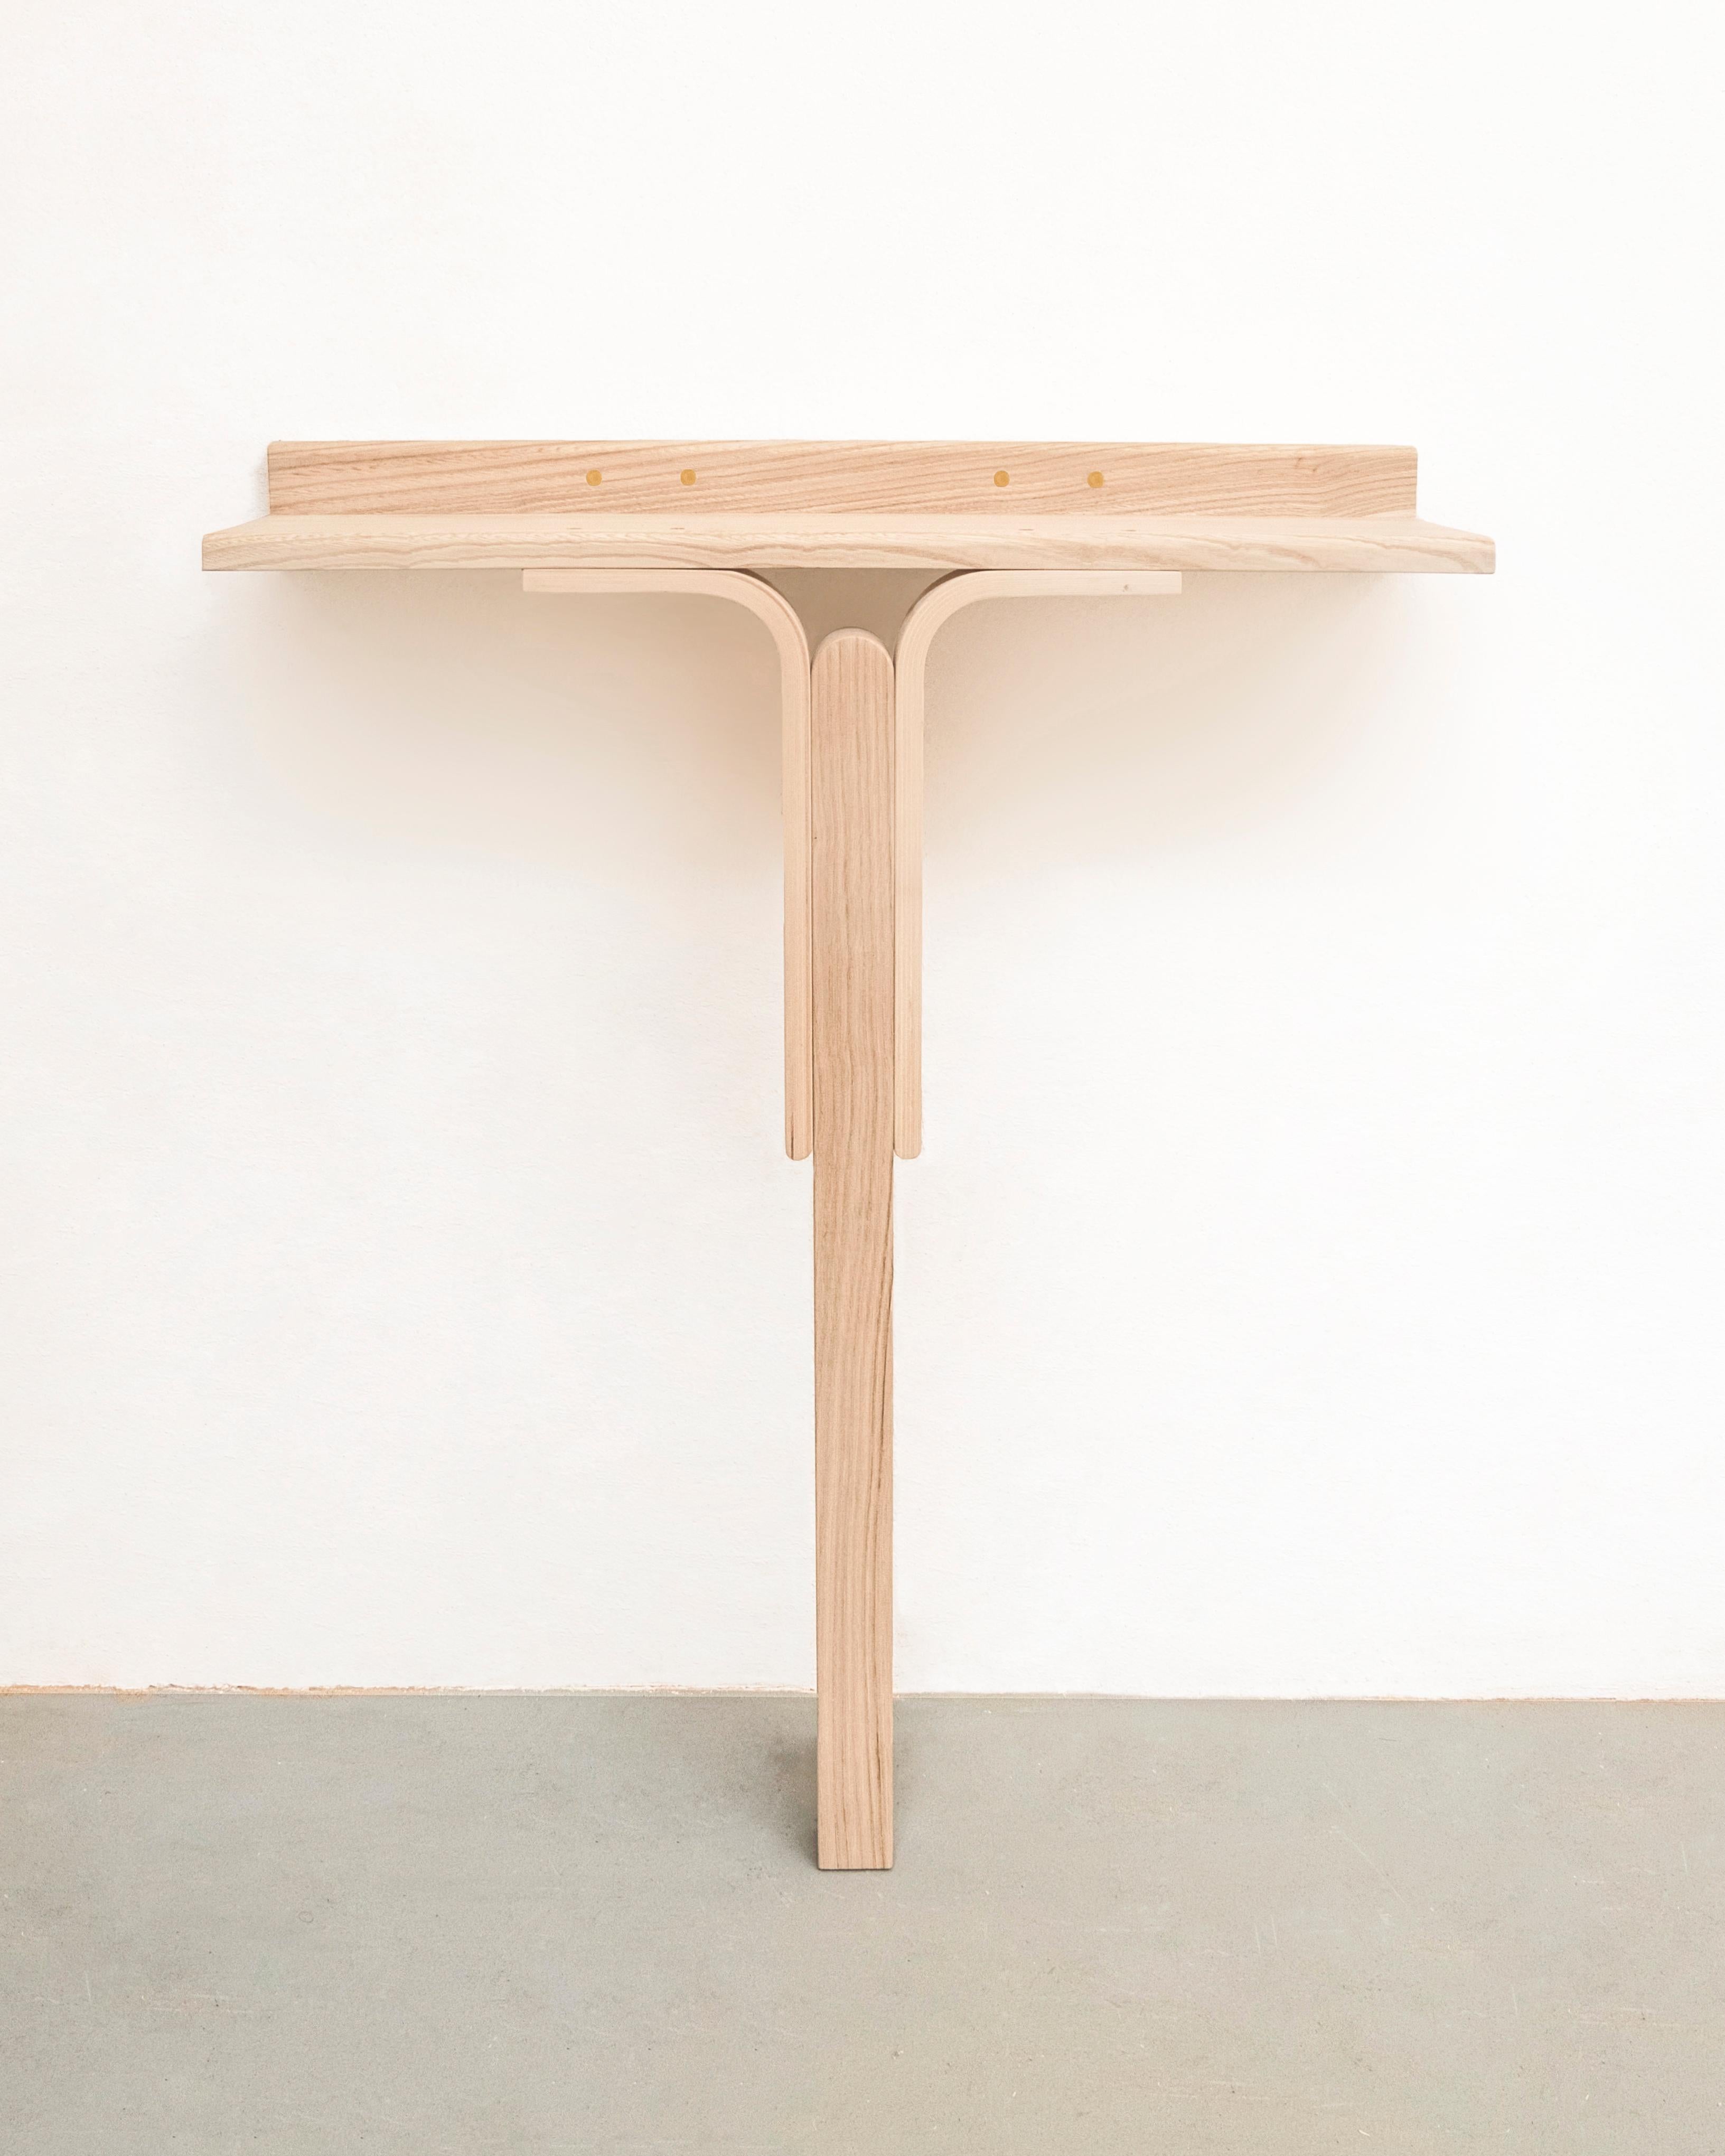 Hand-Carved 21st Century, Contemporary Wood Console Table Handmade in Italy by Ilabianchi For Sale